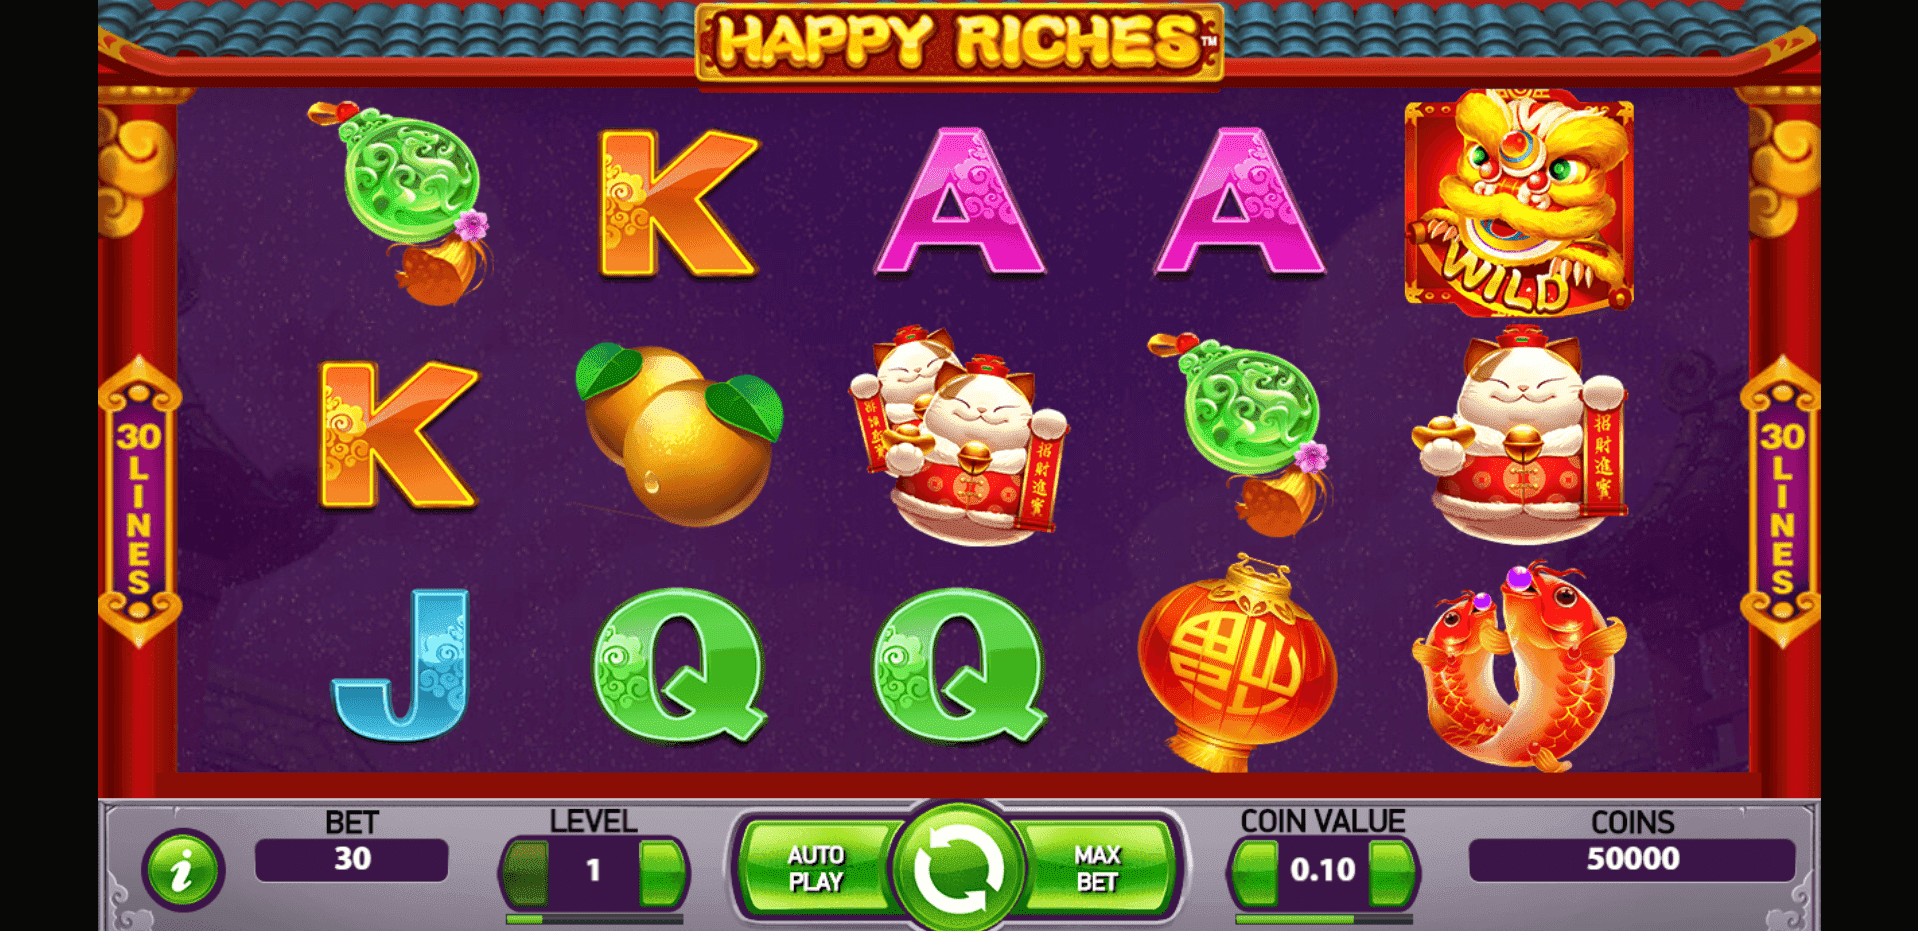 Happy Riches slot play free